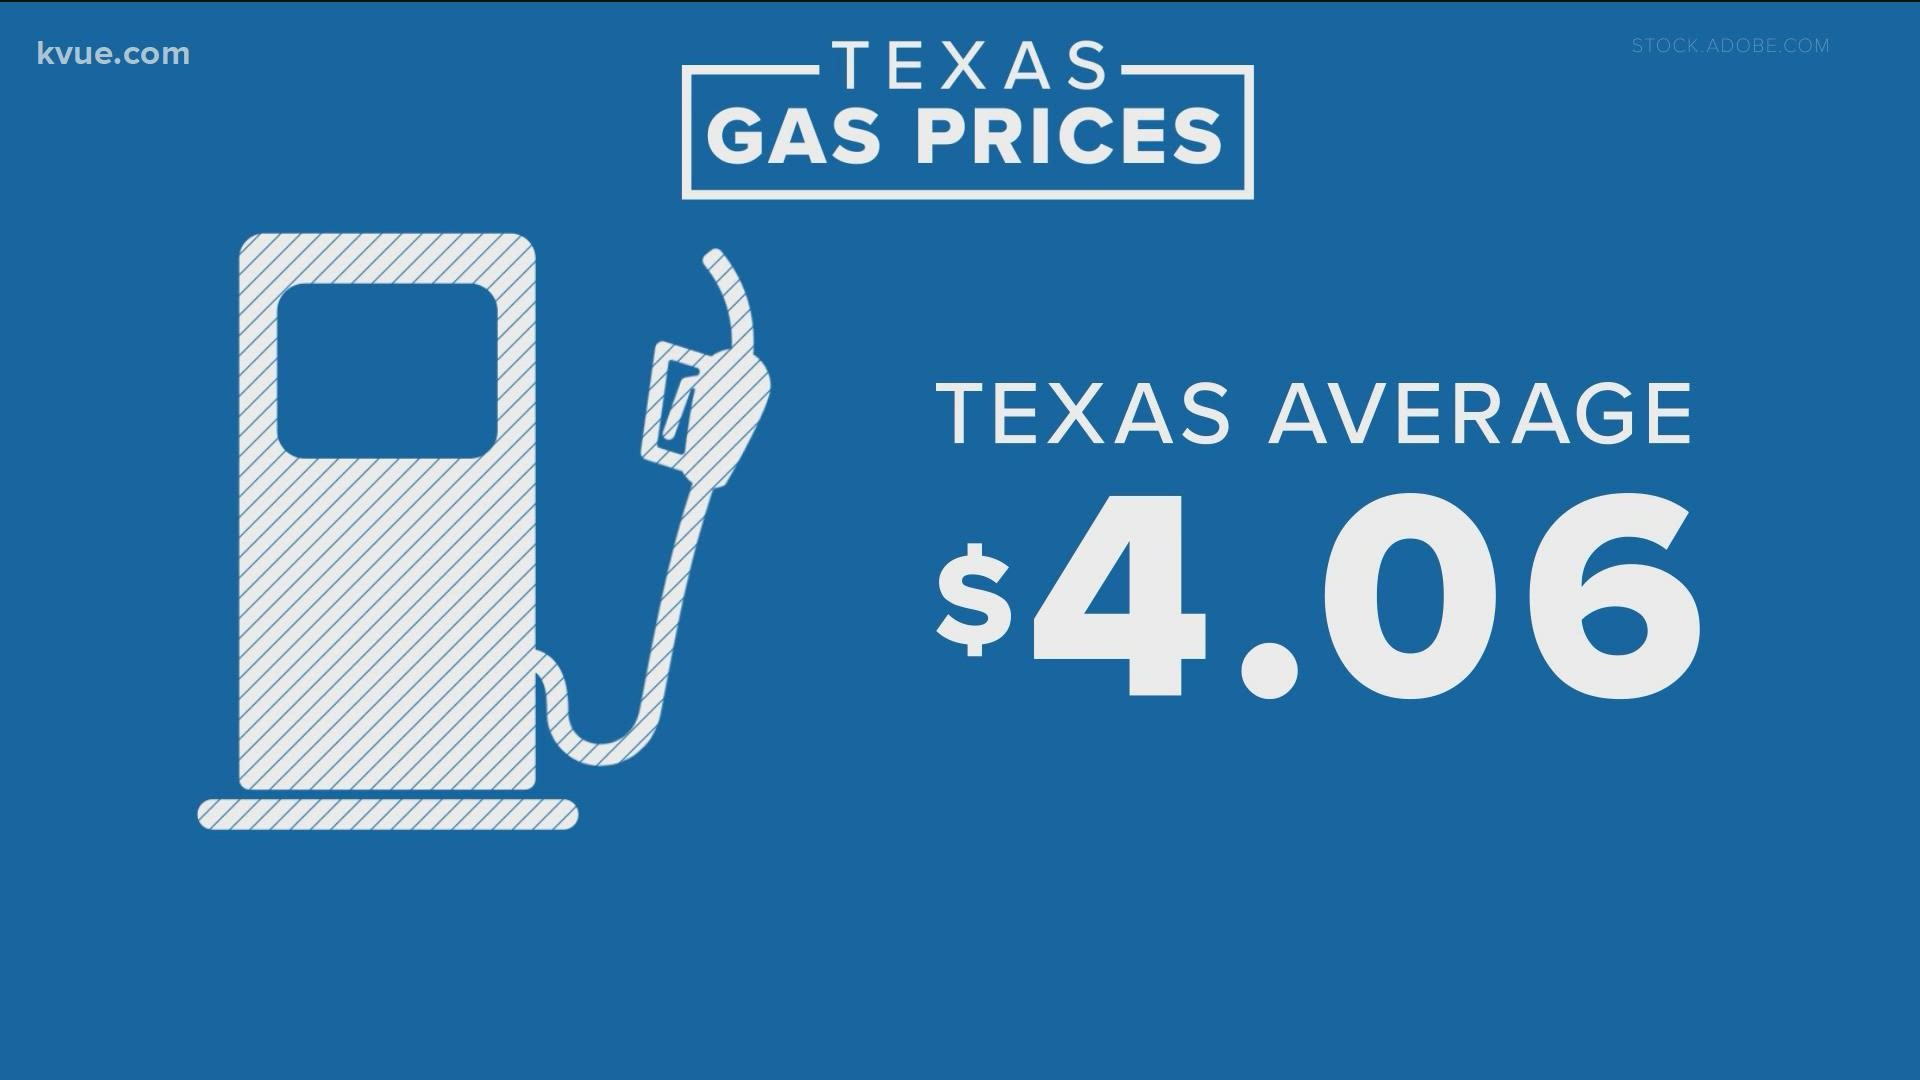 The average price for a gallon of unleaded gas in Texas is now $4.06.